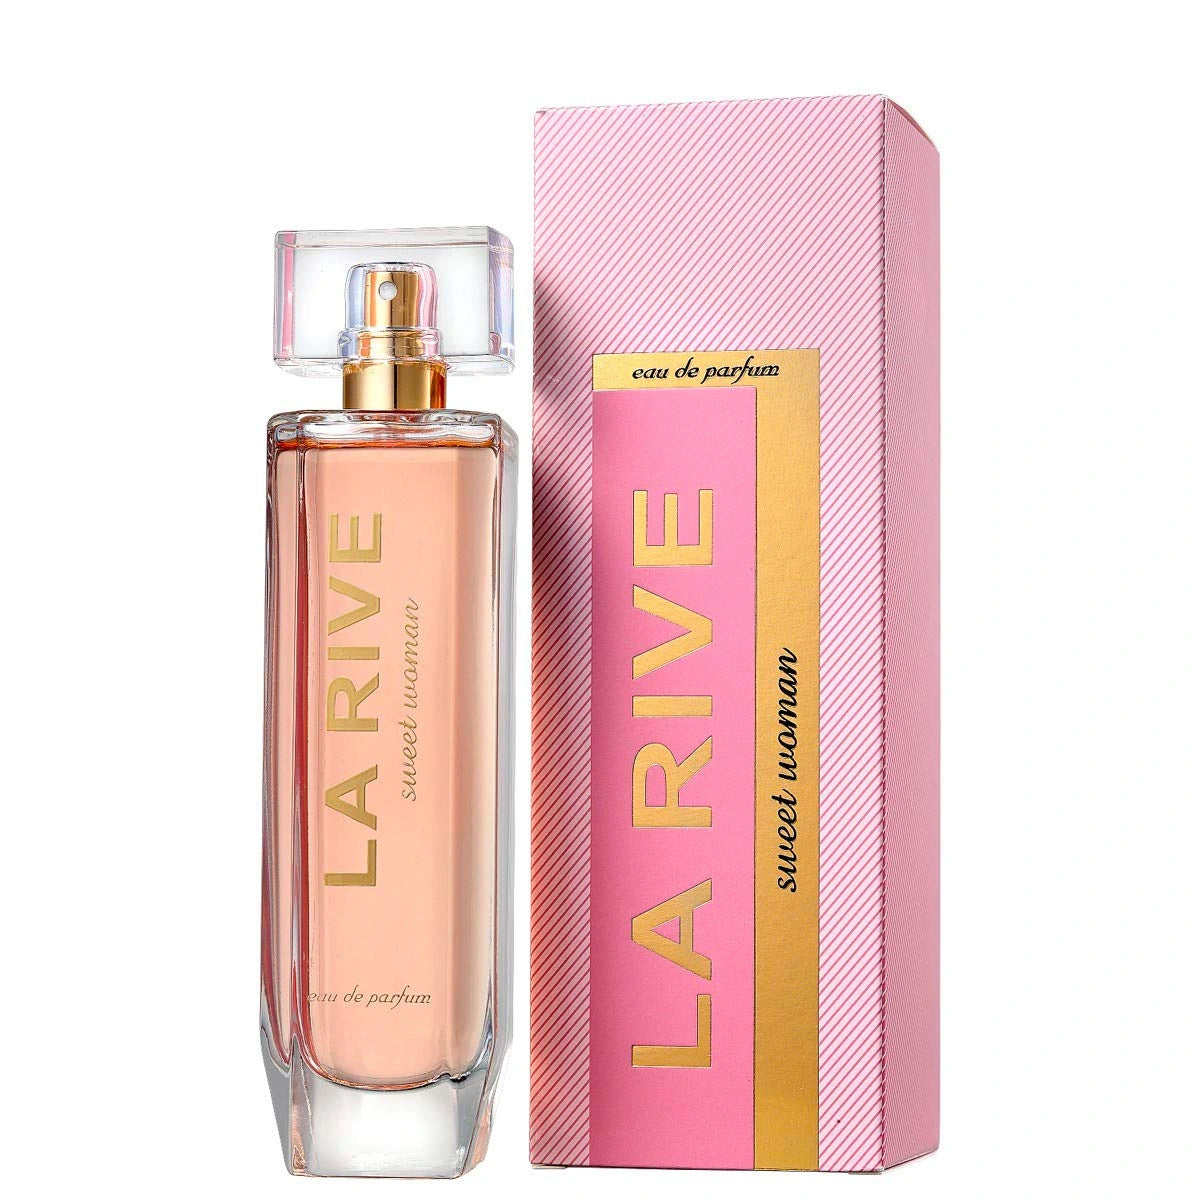 <b>Sweet Woman</b><span> by </span><b>La Rive</b><span> is a Floral Fruity fragrance for women. </span><b>Sweet Woman</b><span> was launched in 2017. Top notes are Peach, Tangerine, Black Currant and Orange; middle notes are Magnolia, Osmanthus, Strawberry and Rose; base notes are Vanilla, Musk and Sandalwood.</span>